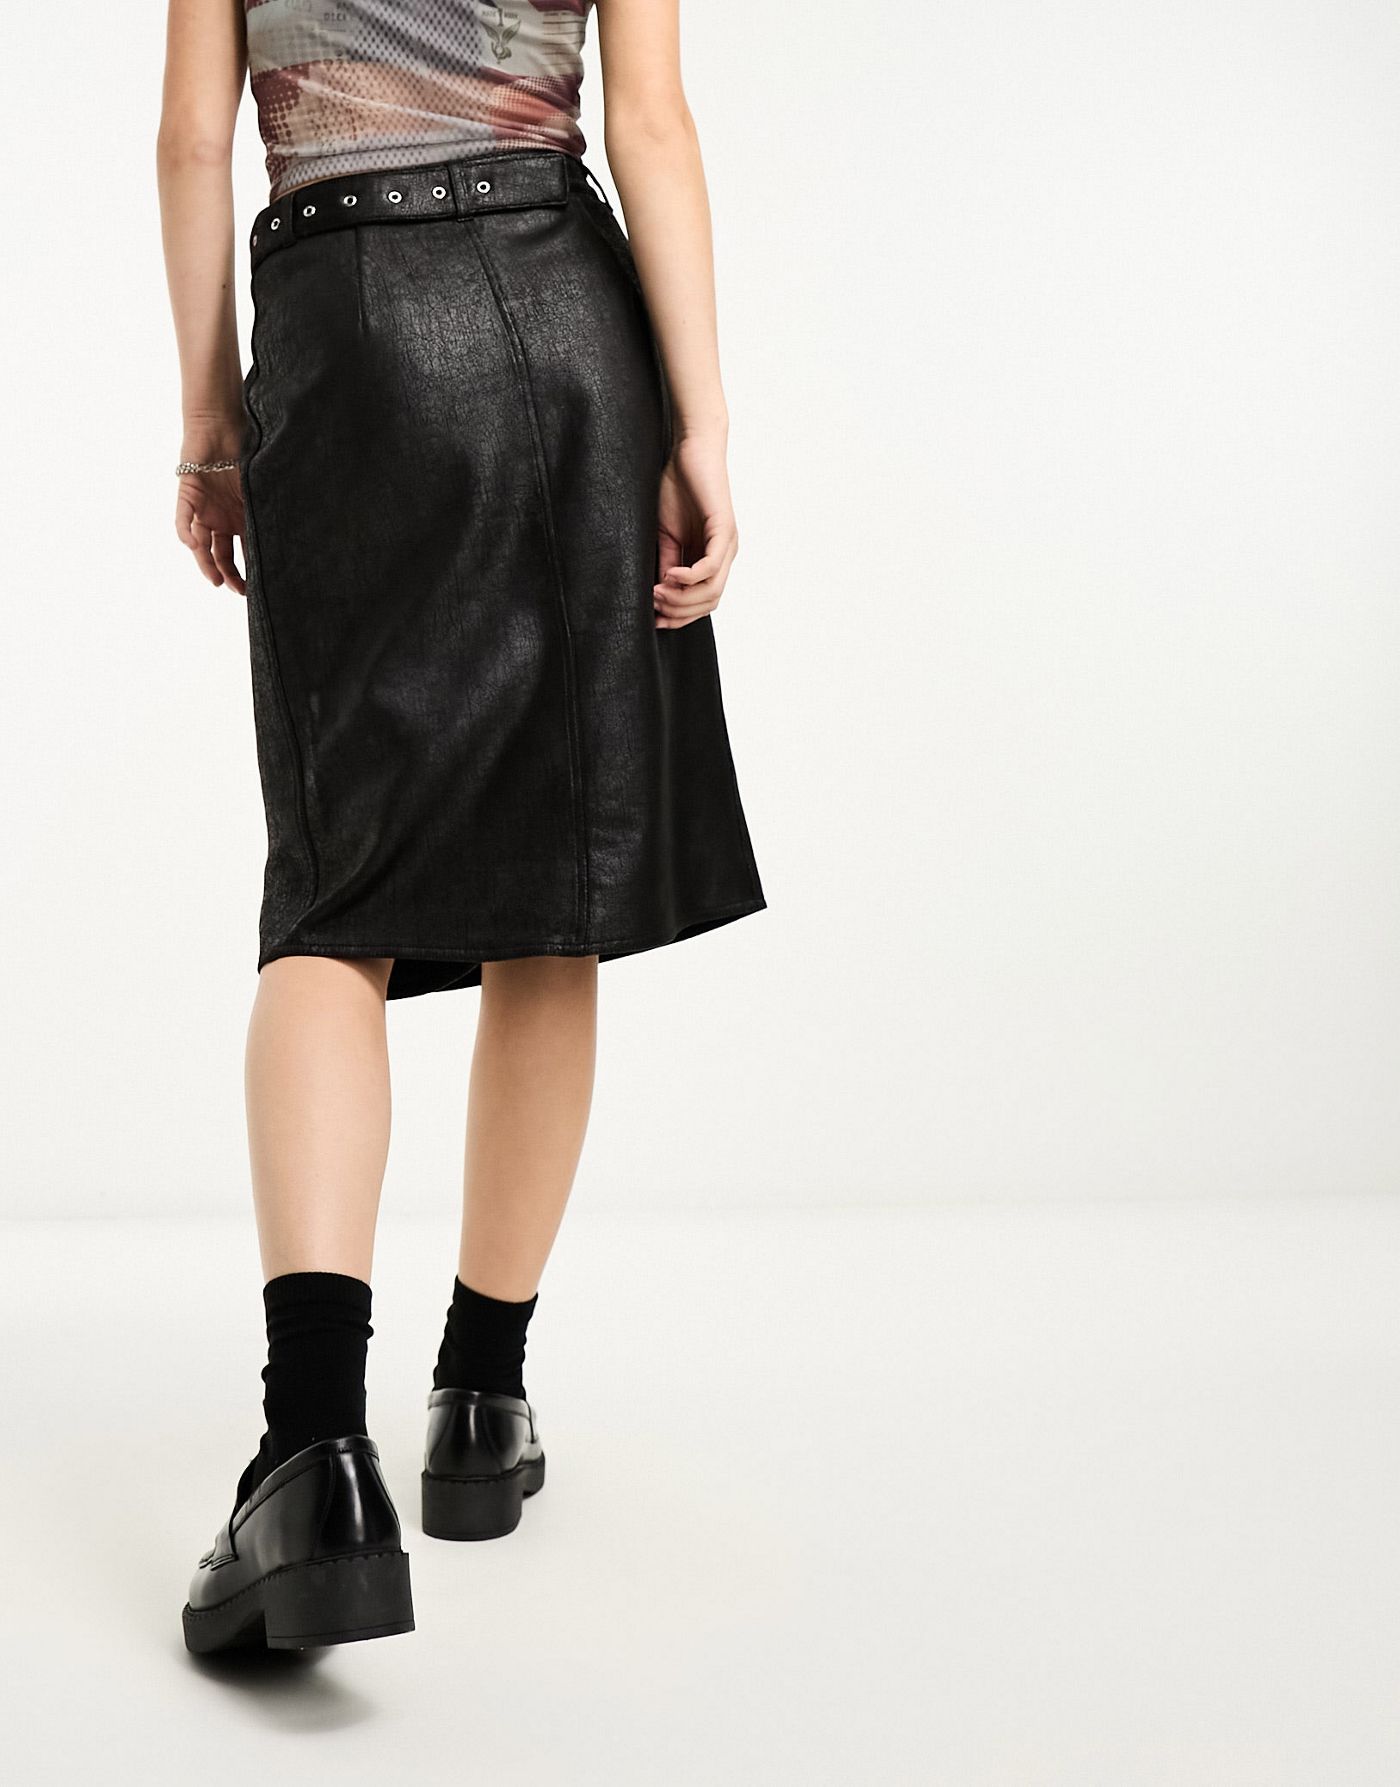 Weekday Oda faux leather midi skirt with belt and hardware details in black 